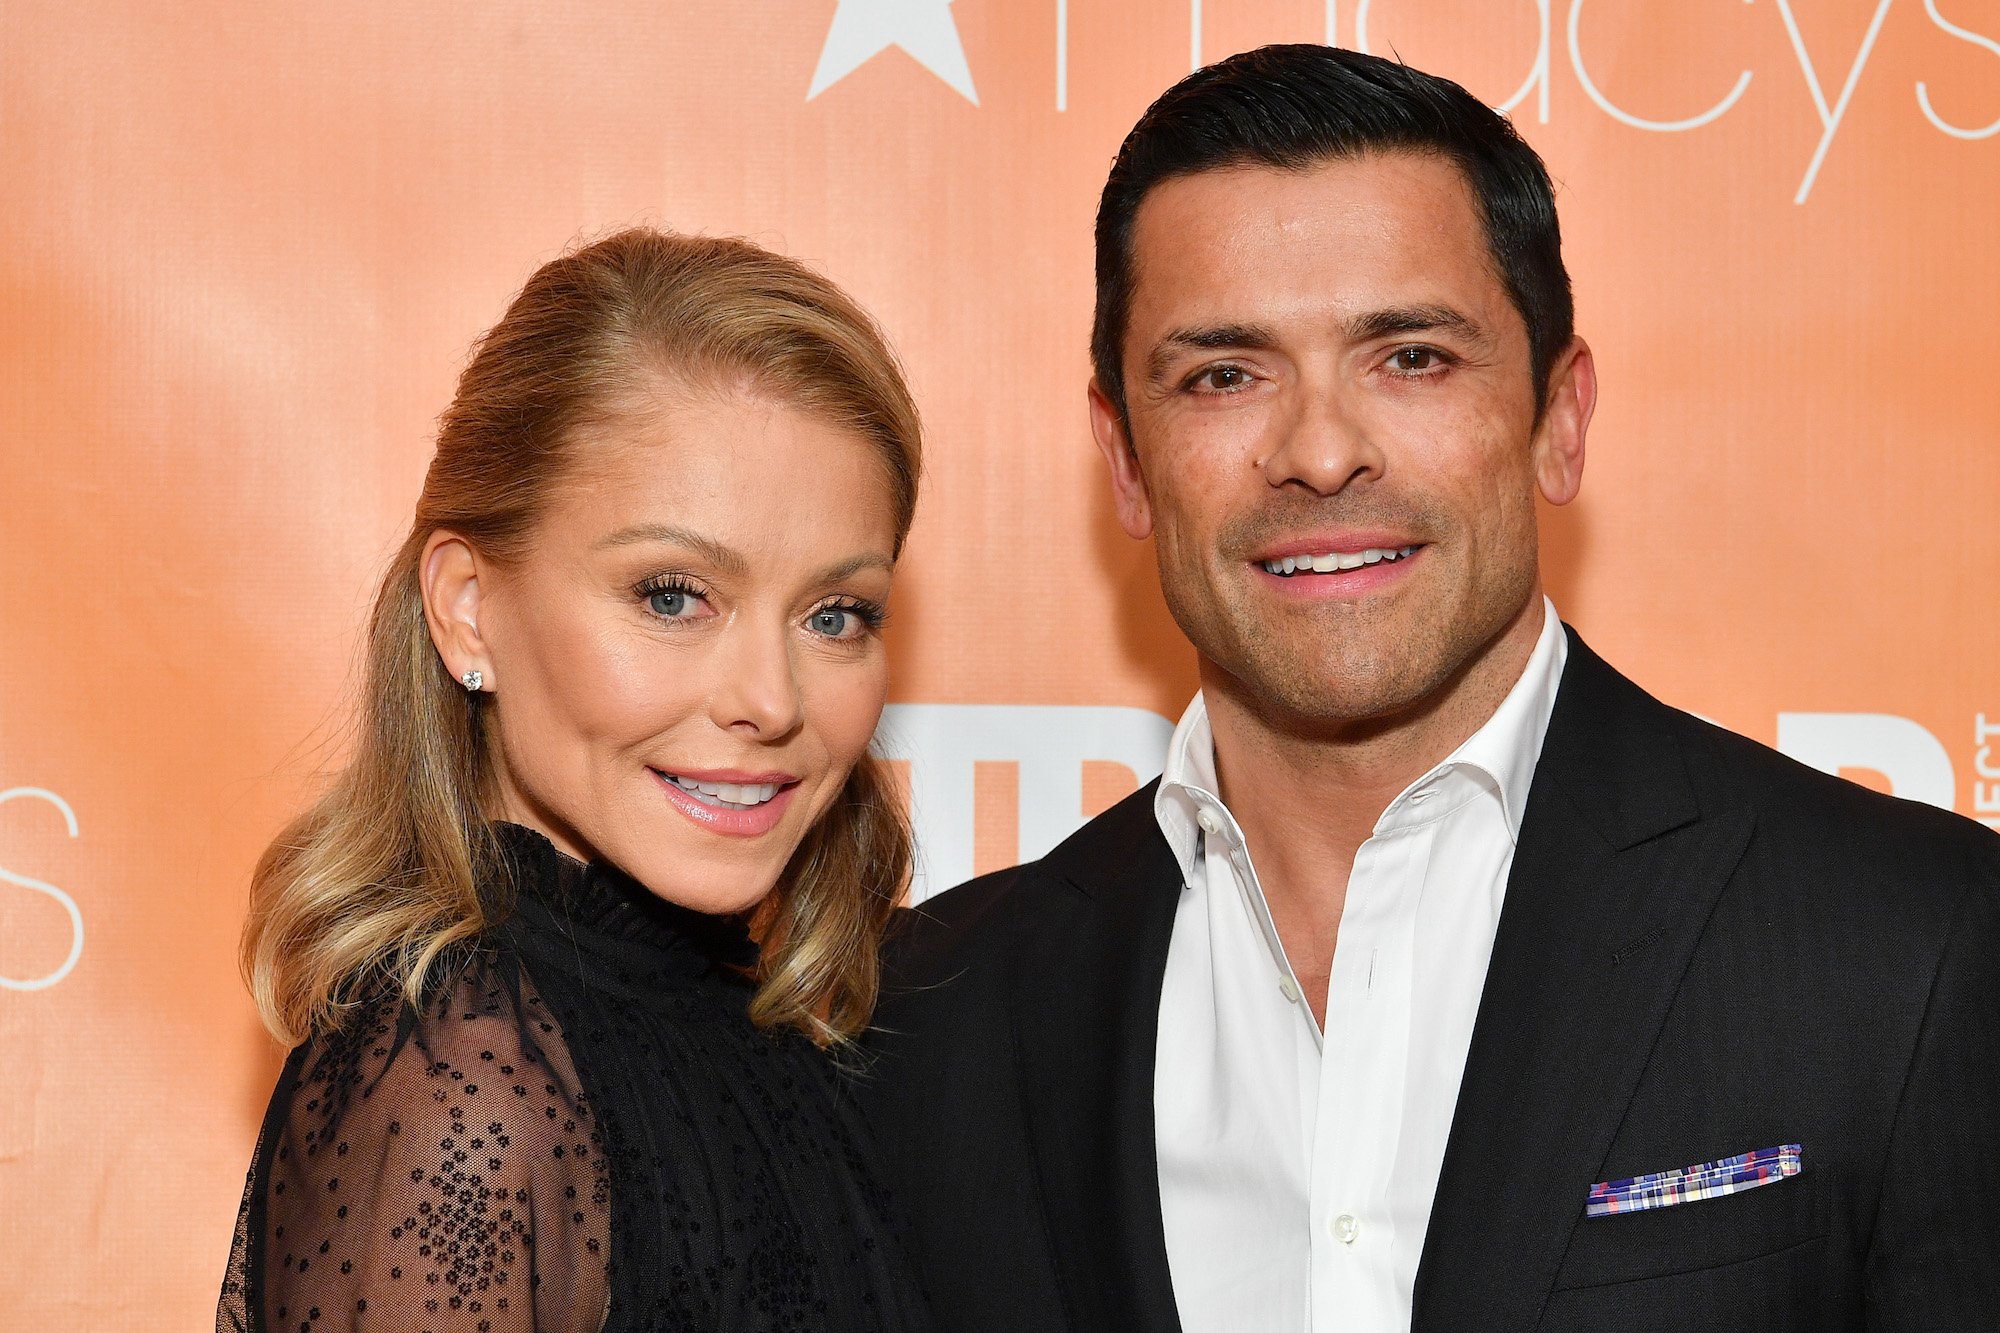 Kelly Ripa Once Passed Out While Having Sex With Mark Consuelos and Woke Up in the Hospital picture picture